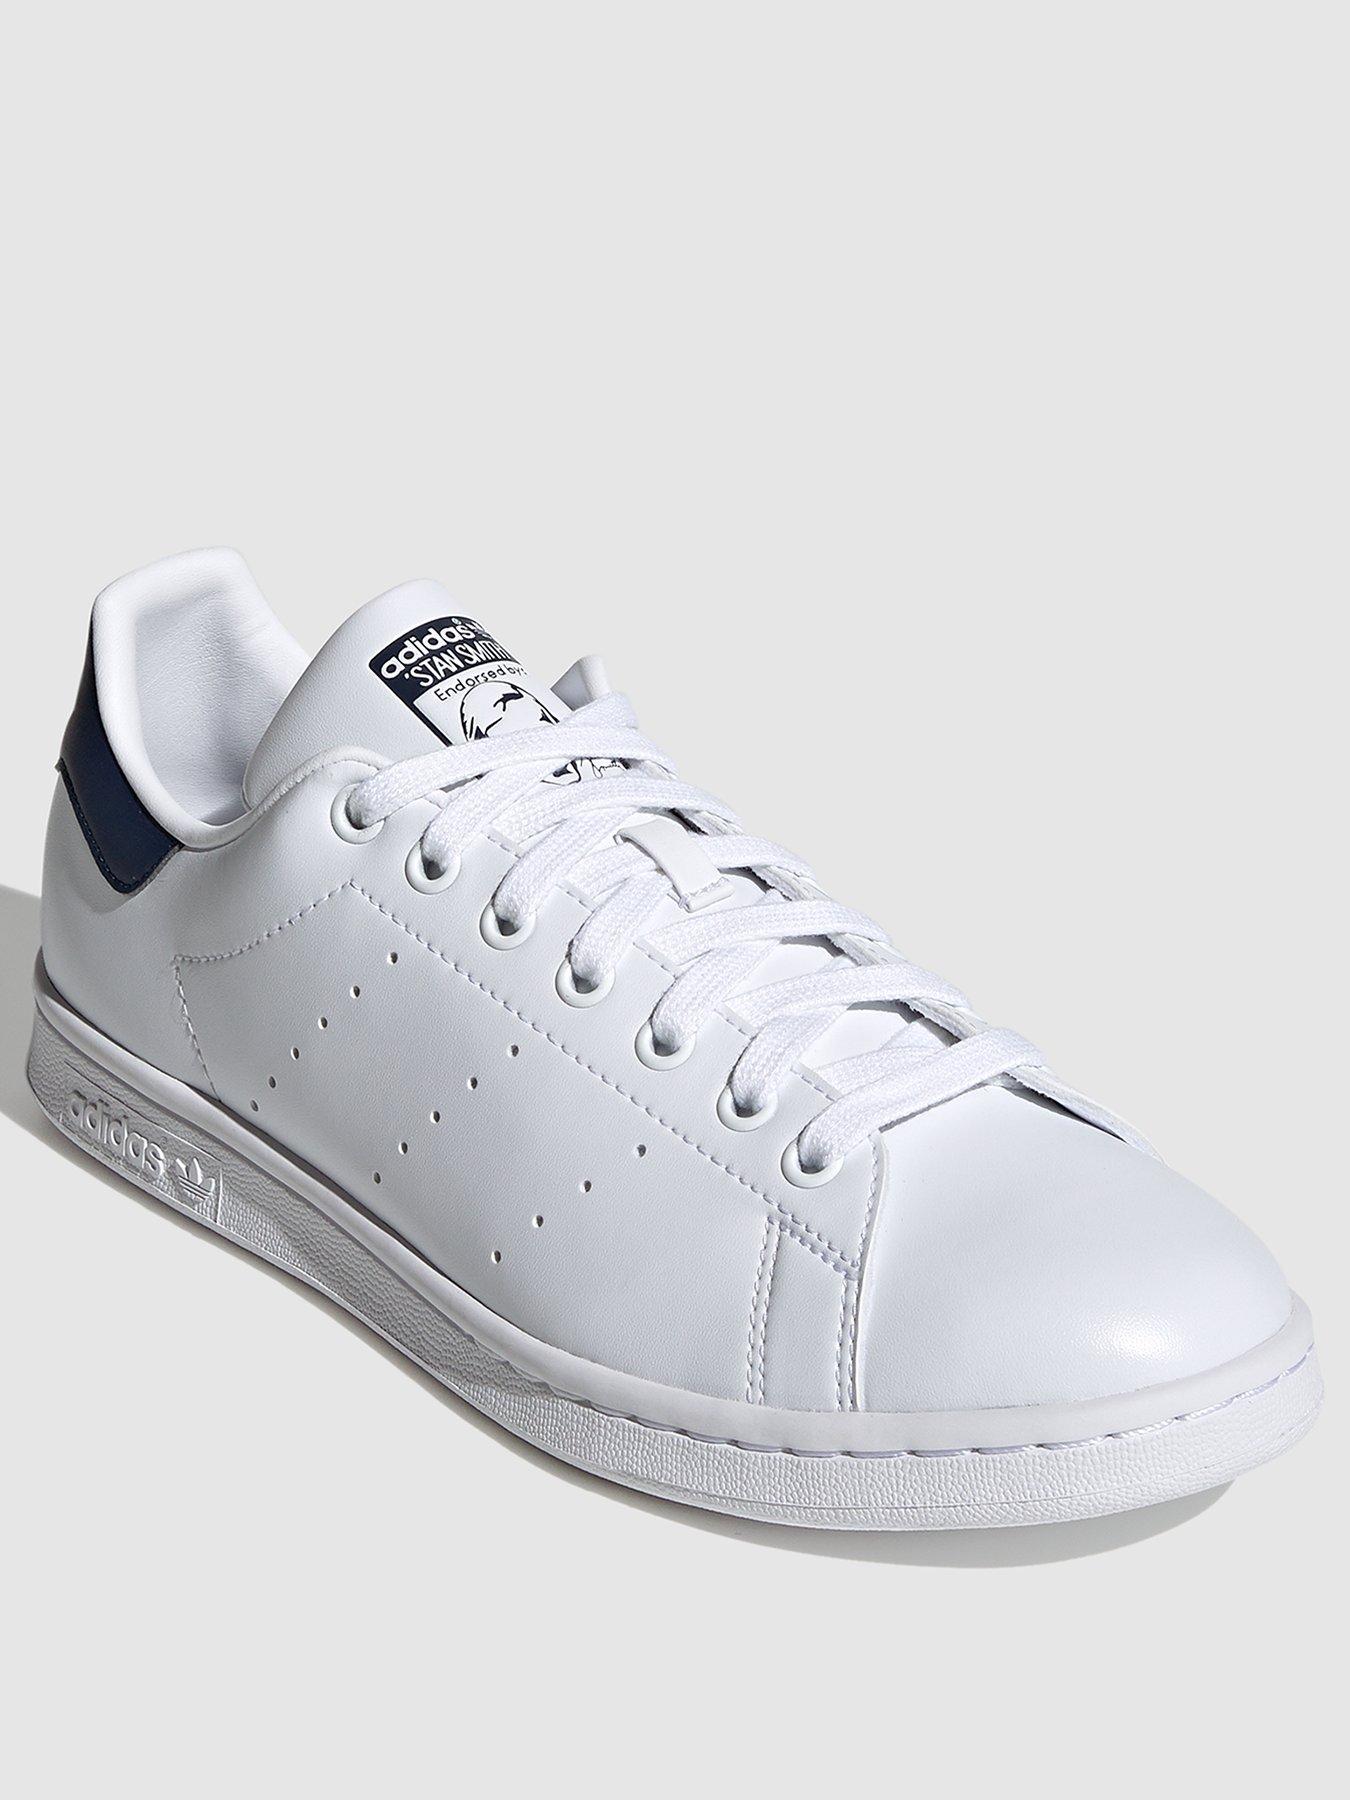 Fristelse Mexico Måned adidas Originals Stan Smith Trainers - White | very.co.uk